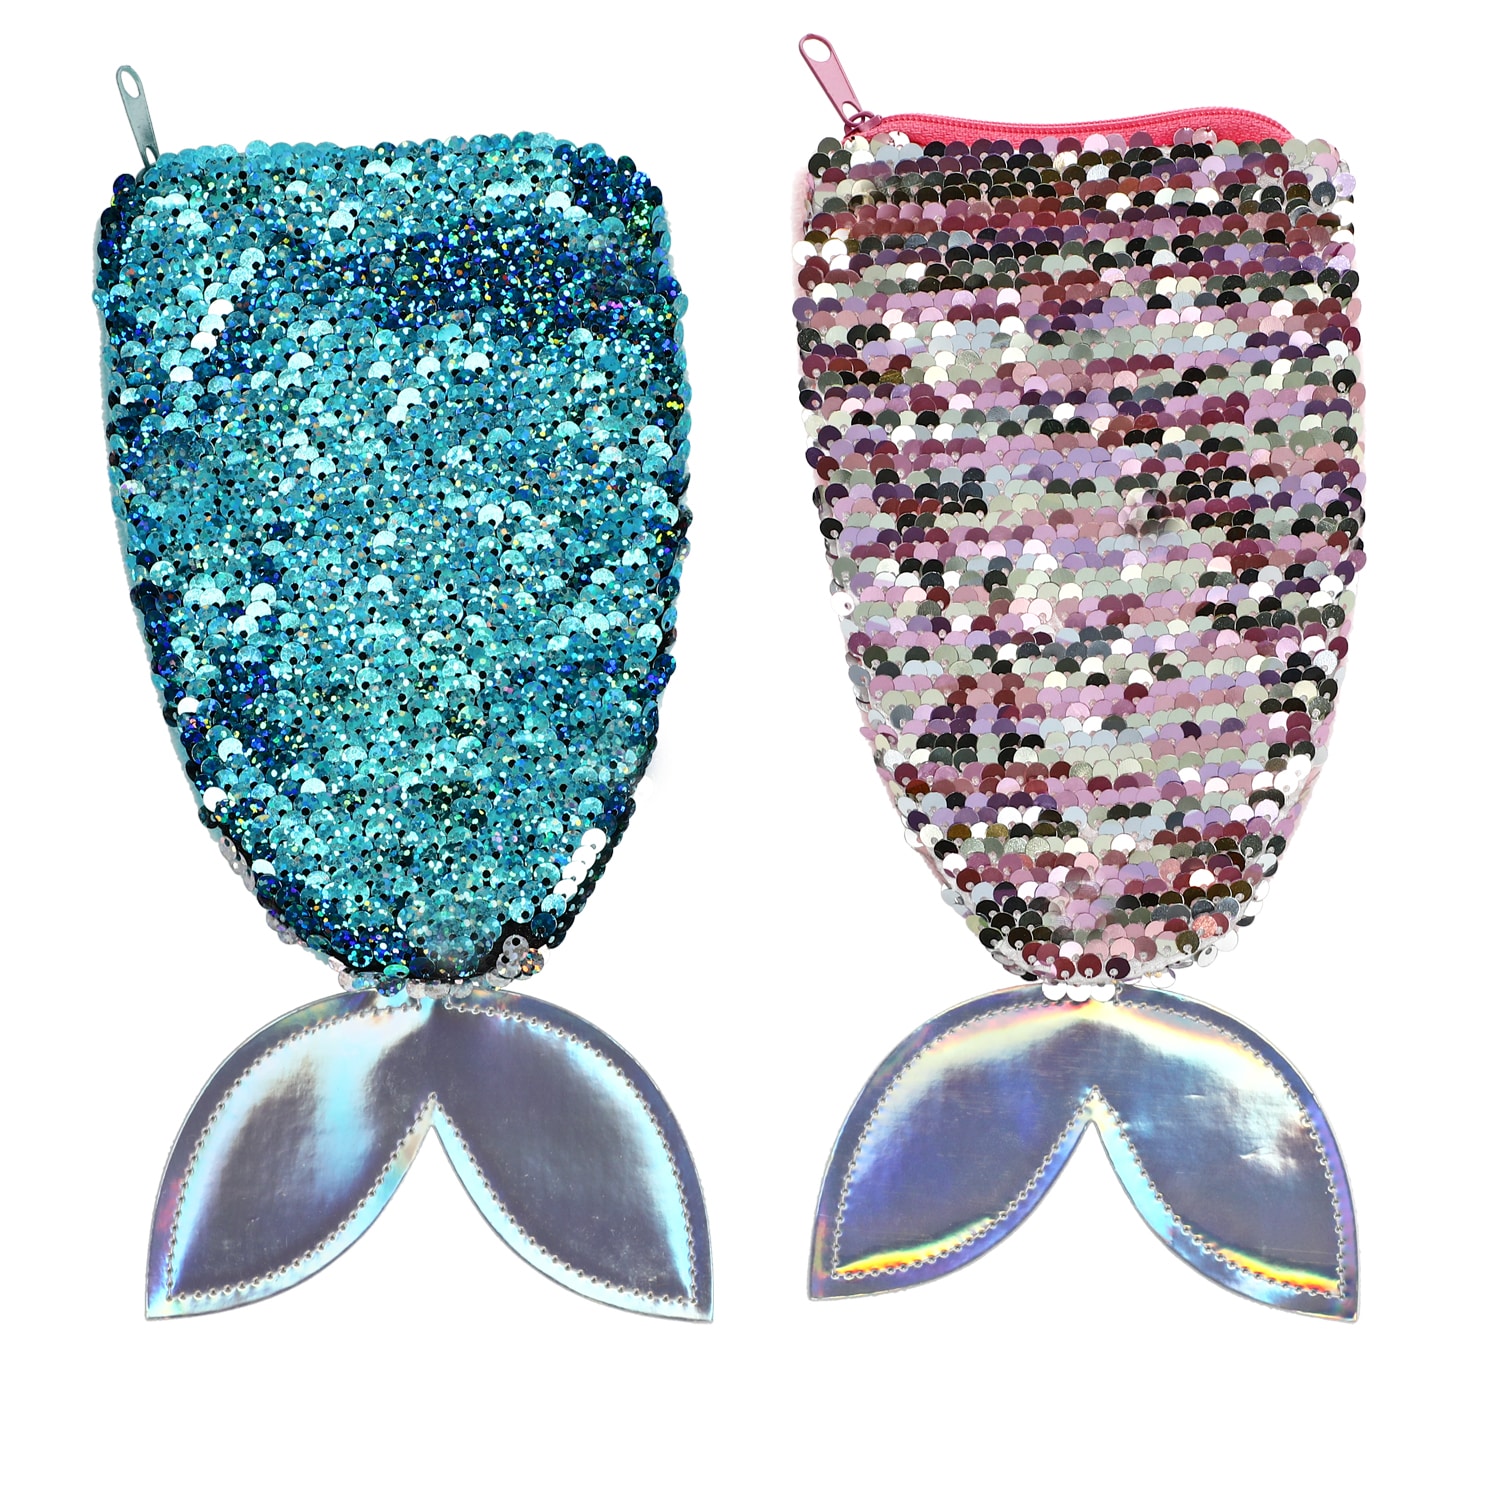 View Jot Sequined Mermaid Tail-Shaped Pencil